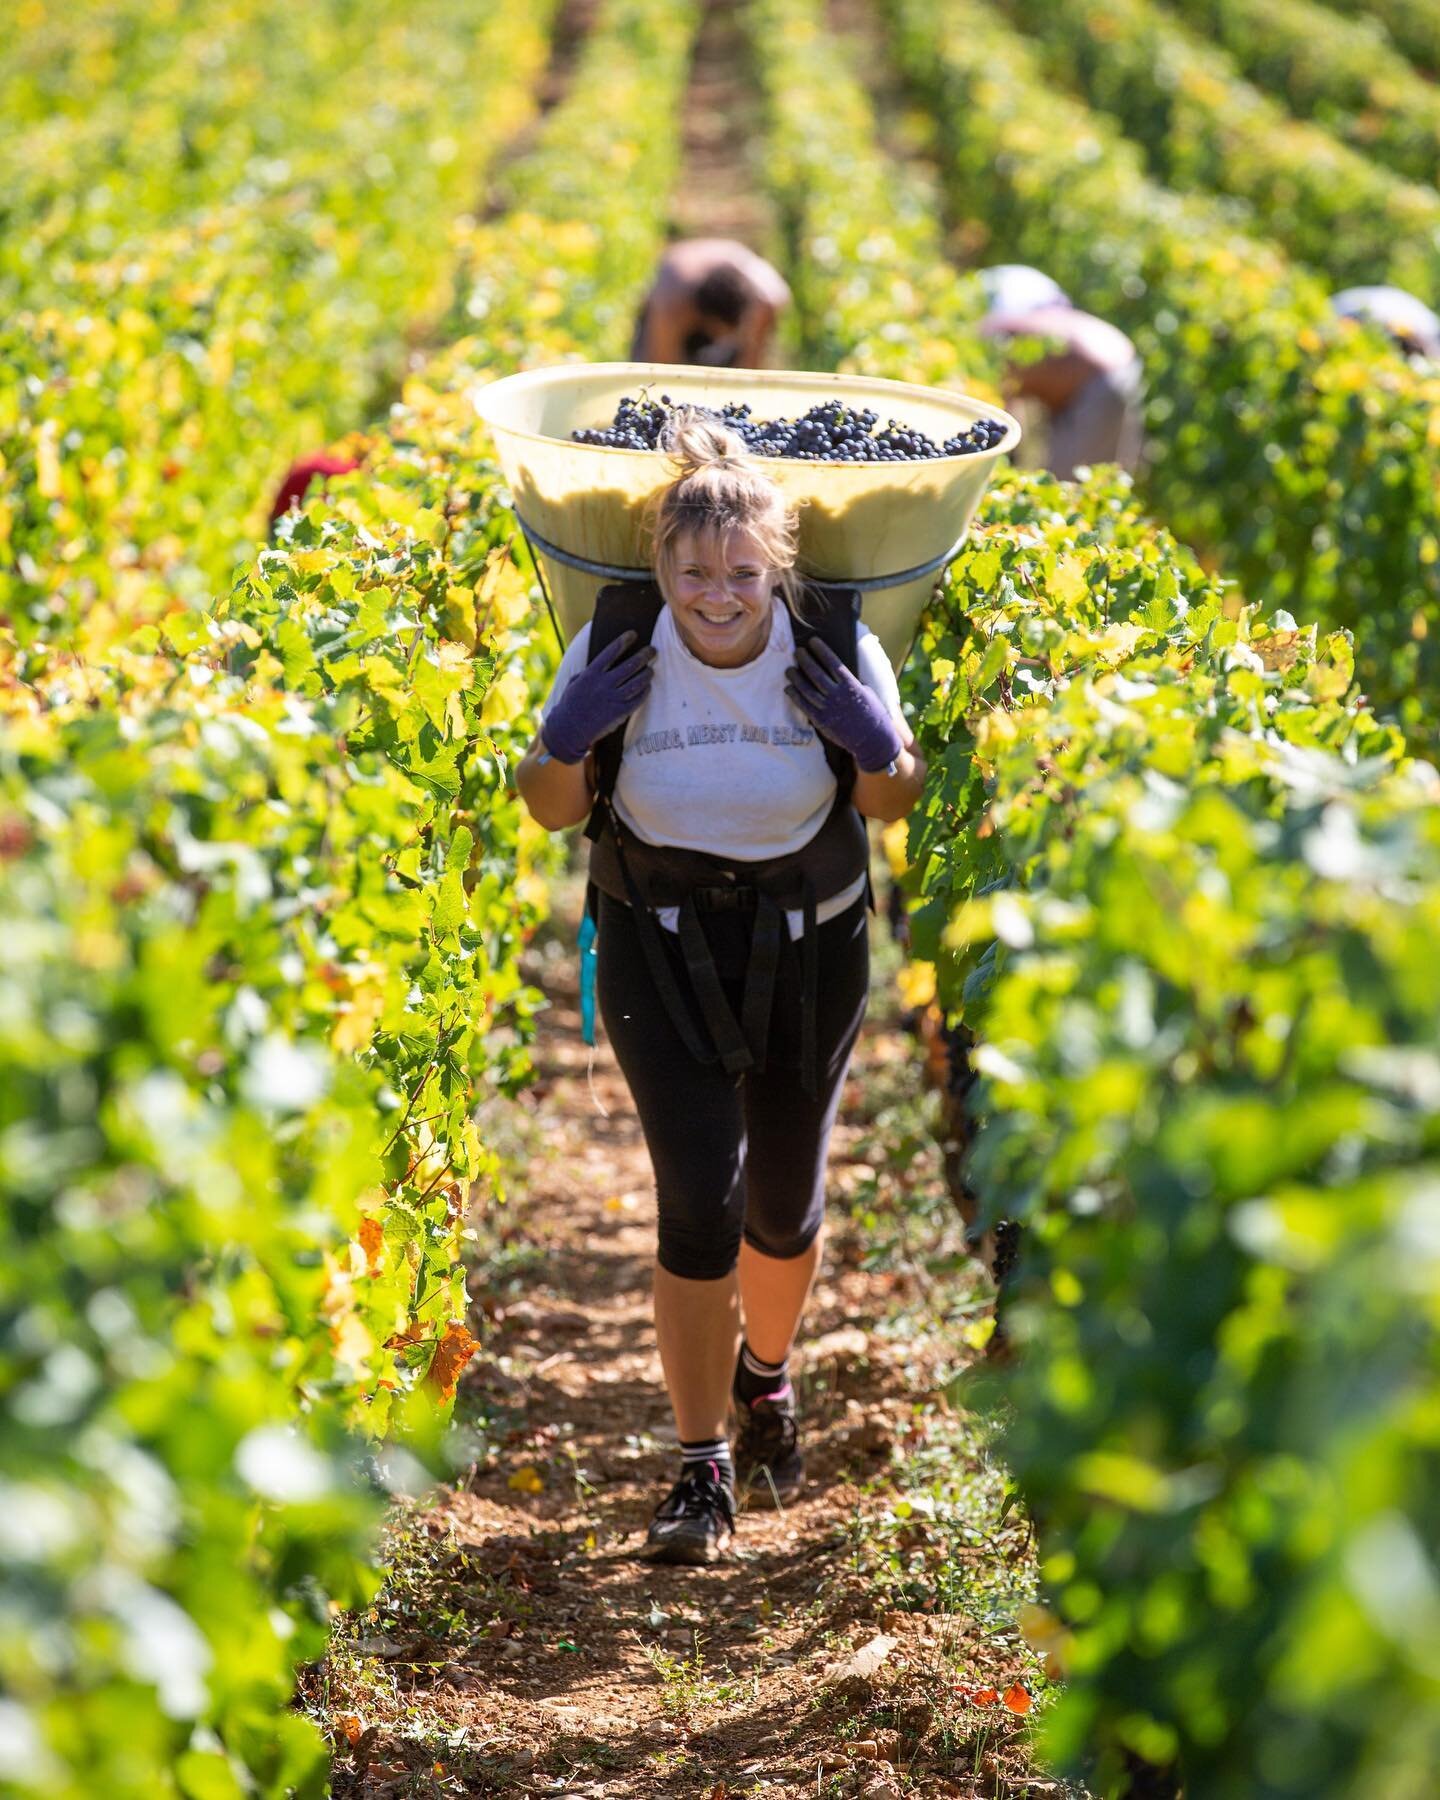 Ever dreamed of working a harvest in Burgundy? 🍷🇫🇷 @batonnage_forum has opened applications for the 2023 Harvest Internship at Domaine Dujac, a historic, family-owned estate in the Morey-Saint-Denis AOC.

Launched in partnership with Domaine Dujac